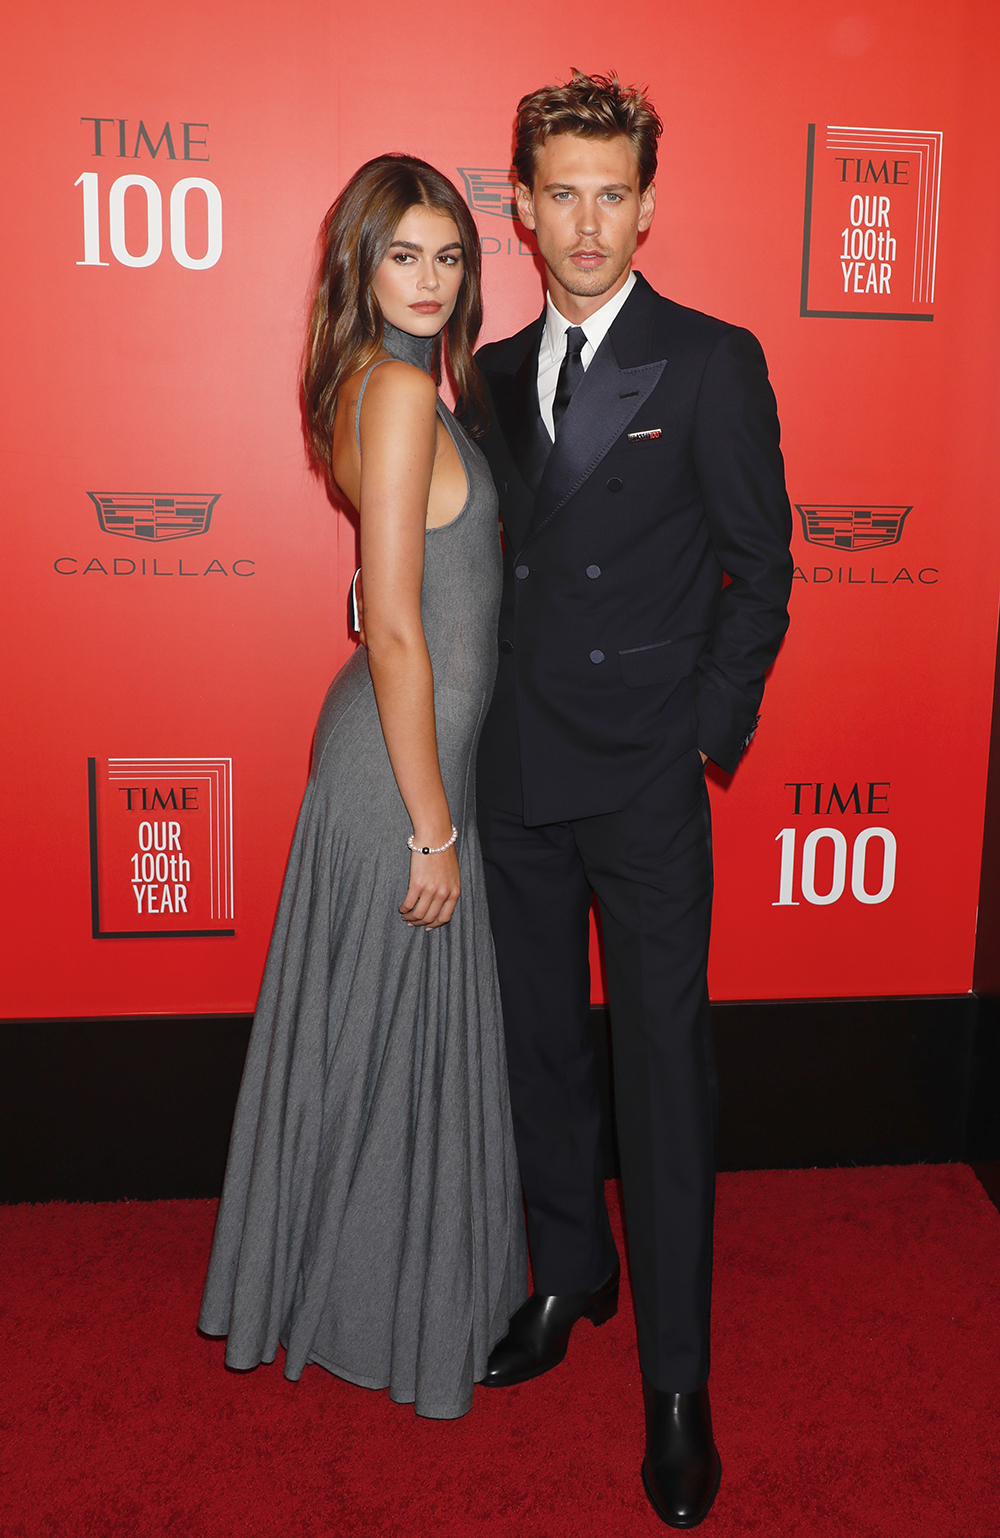 Kaia Gerber and Austin Butler pictured at the TIME100 Gala in New York on April 26, 2023. The couple started dating in December 2021 before making their first public appearance as a couple at a W magazine party in Los Angeles in March 2022